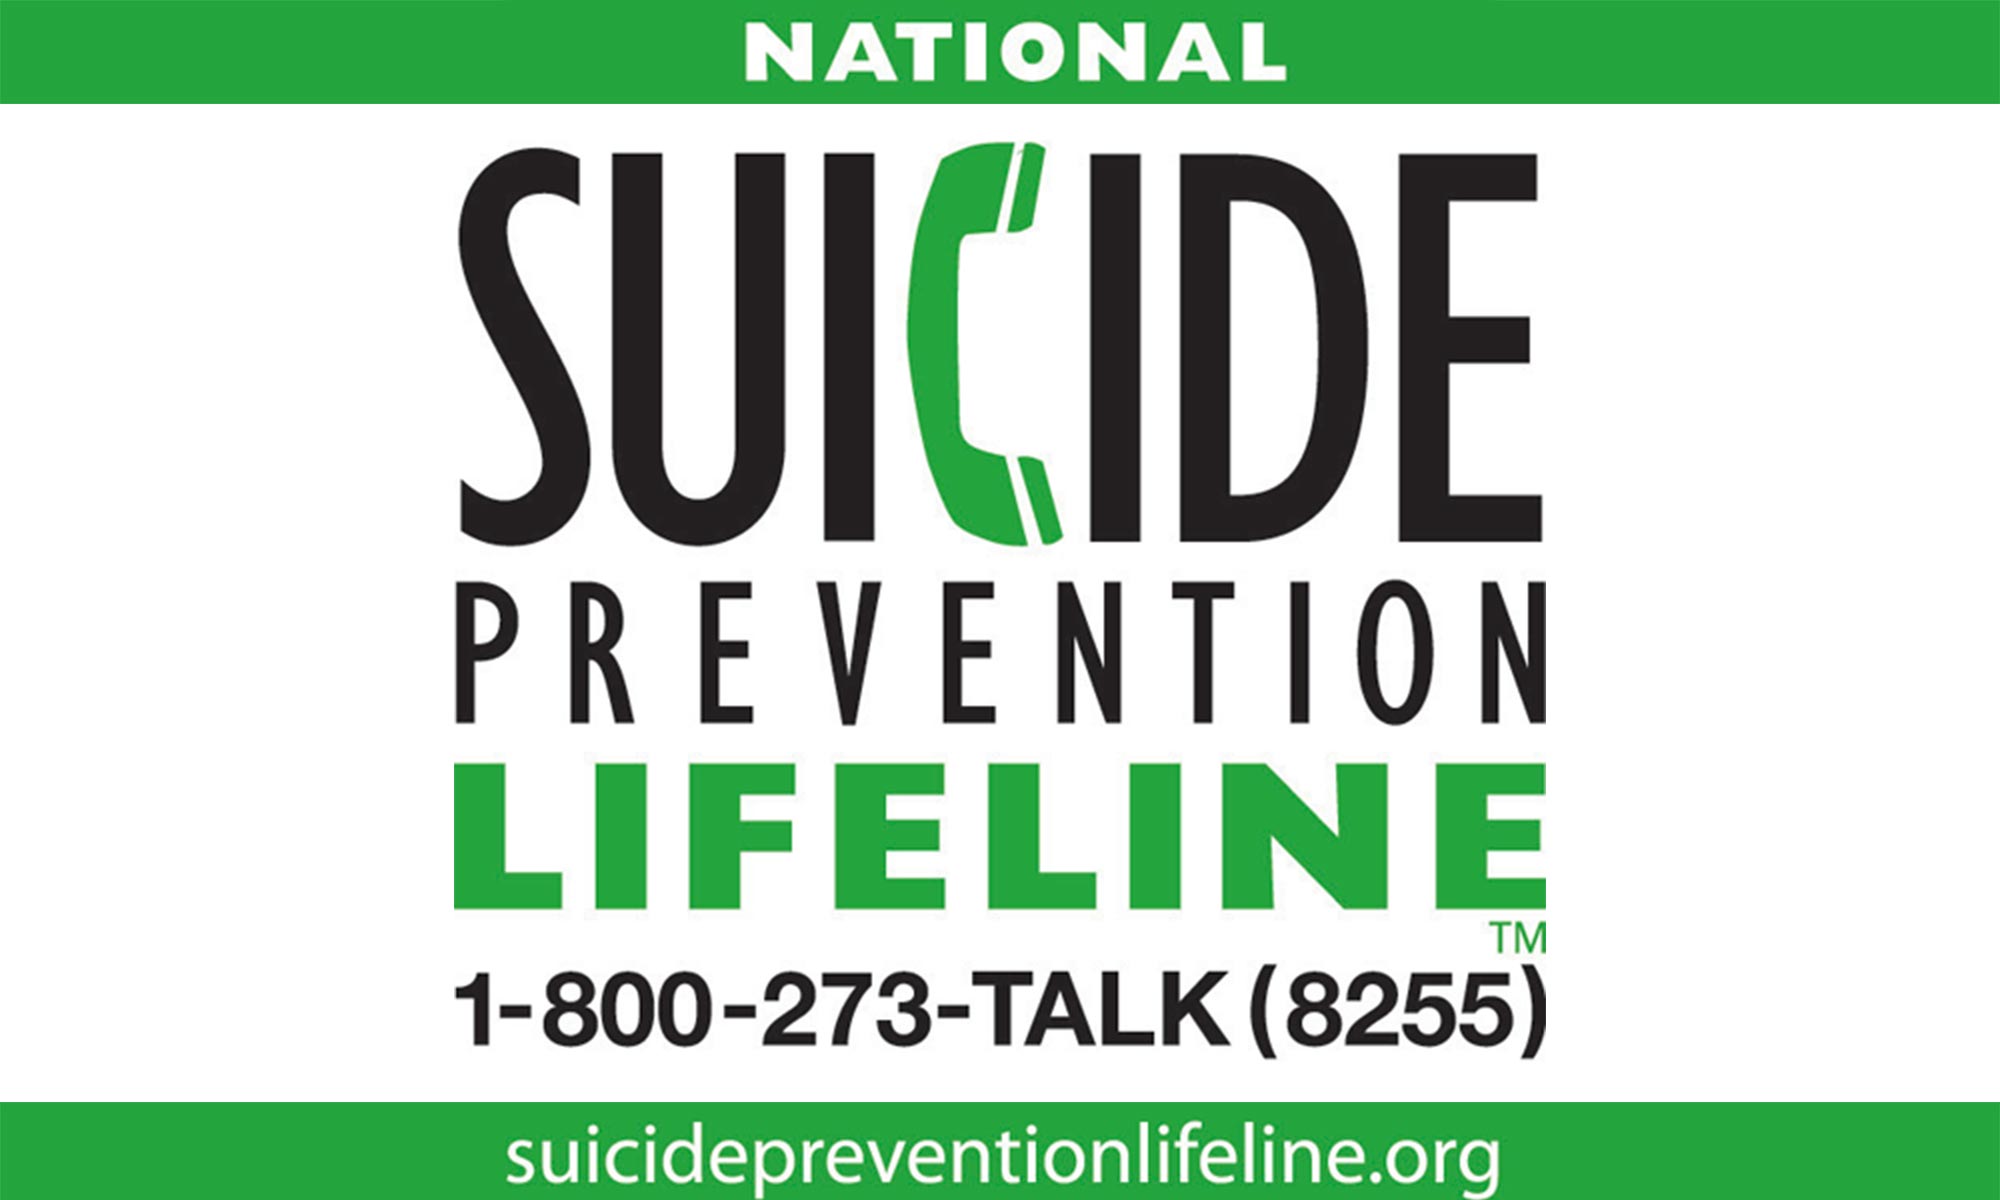 Suicide prevention. Click to learn more about this topic from the Student Wellness center, or call 972-883-8255. The National Suicide Prevention Lifeline can be reached at 1-800-273-8255 or suicidepreventionlifeline.org.